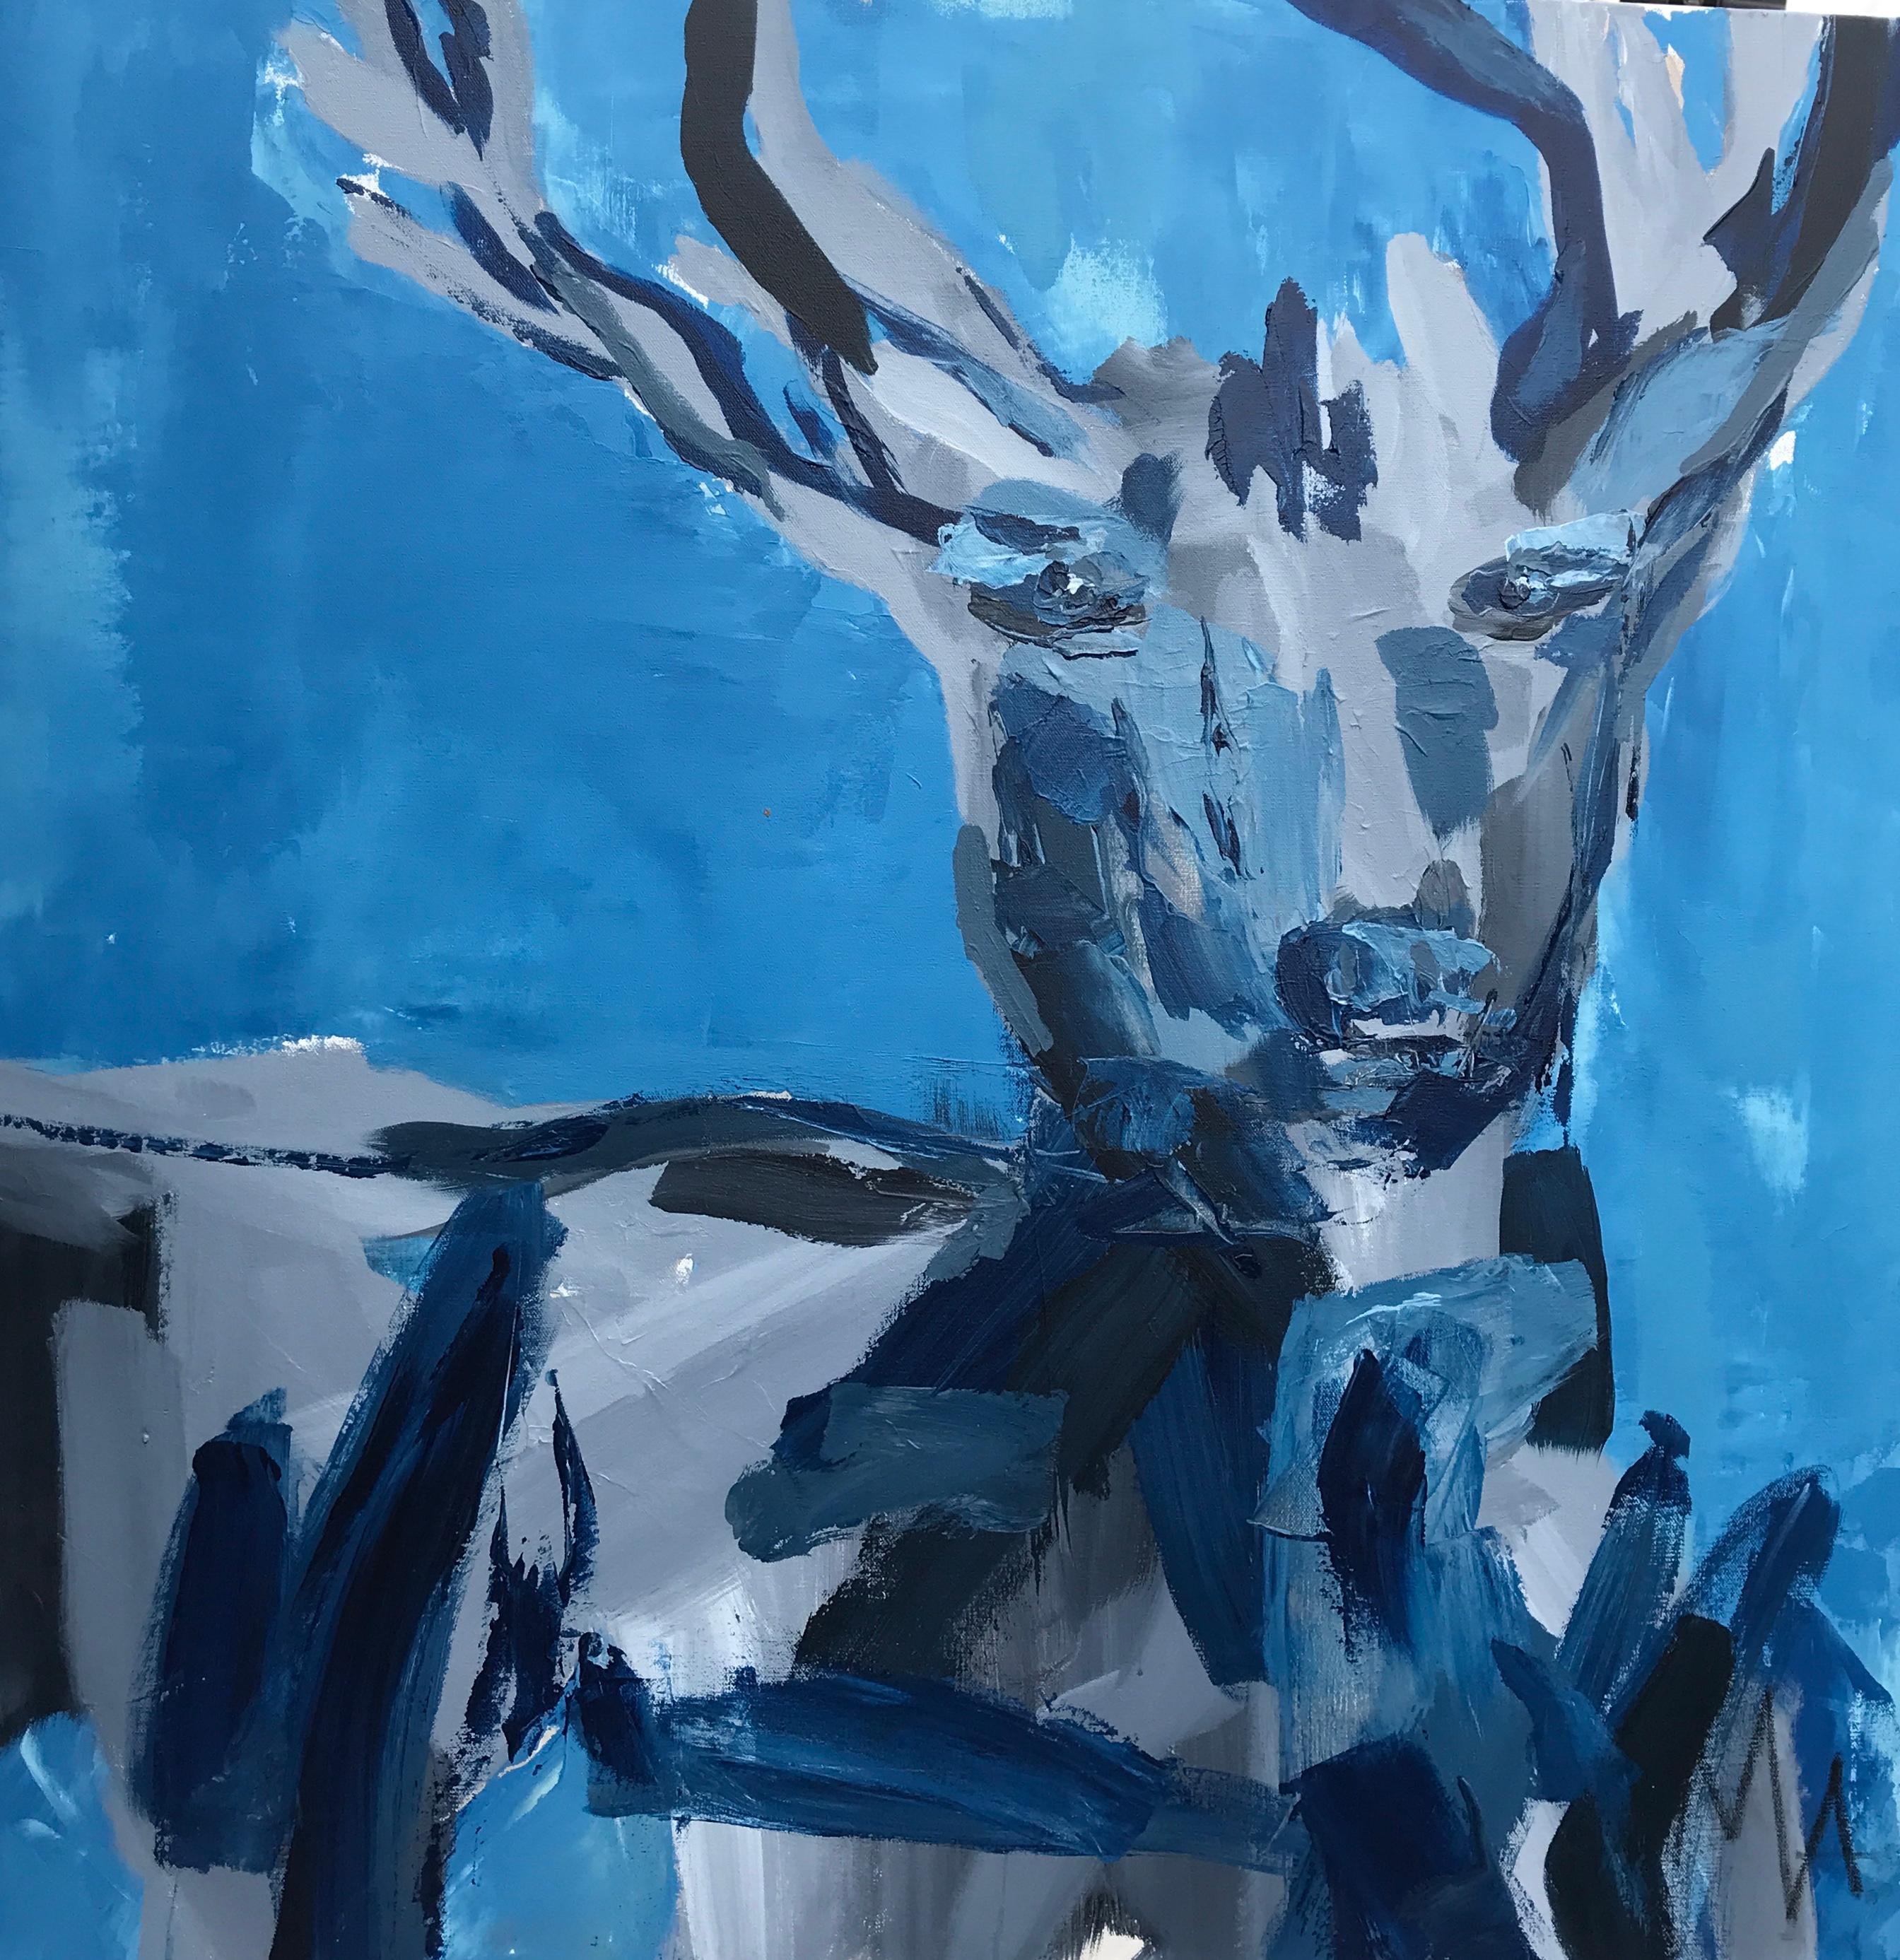 'Buck in Blue' is a large abstracted mixed media on canvas painting of square format created by American artist Mia Frandsen in 2018. Featuring an exquisite palette made of a tonality of blue, the painting grabs our attention with its unusual